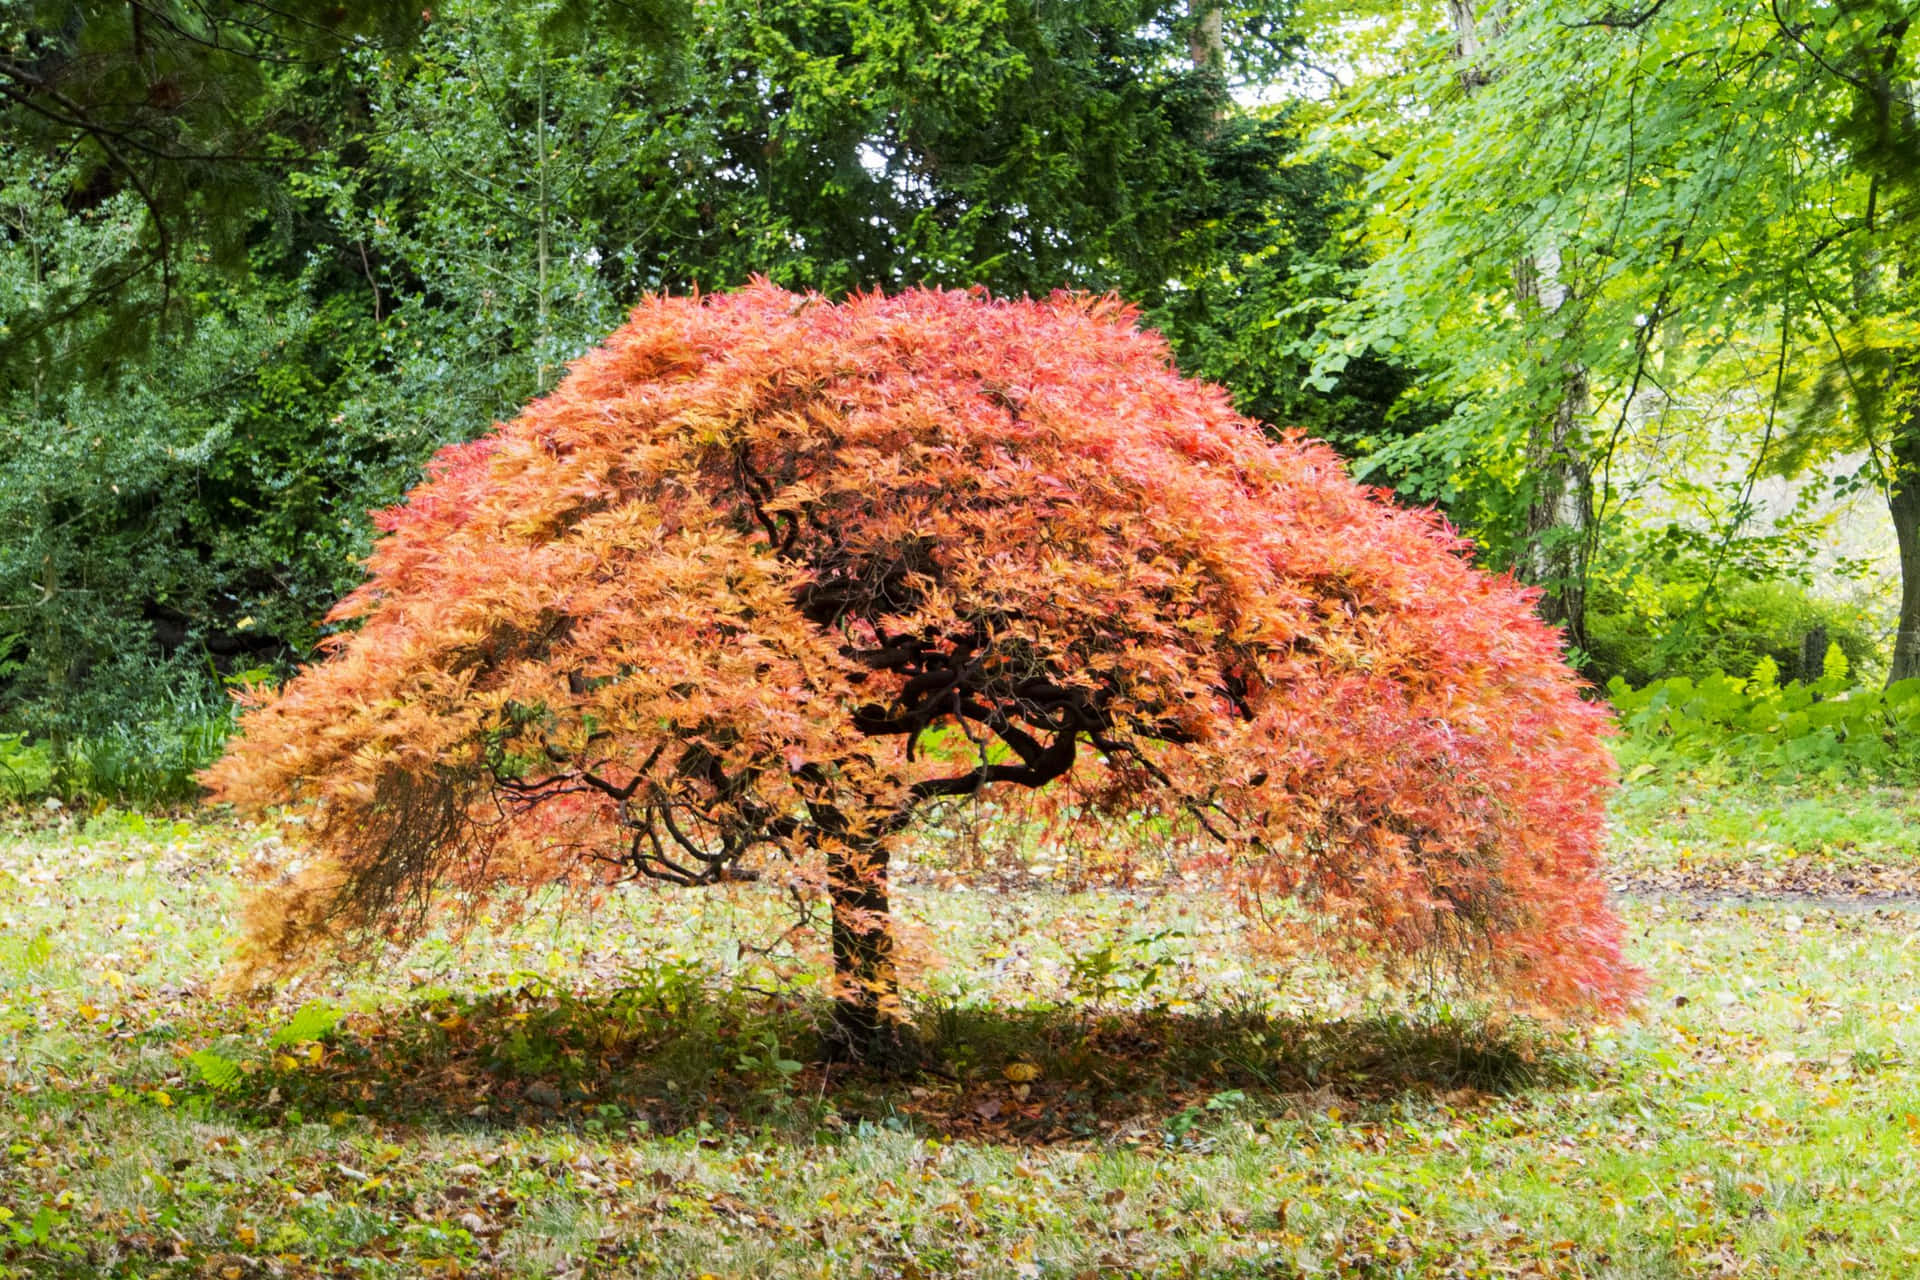 A Red Tree In A Park With Trees